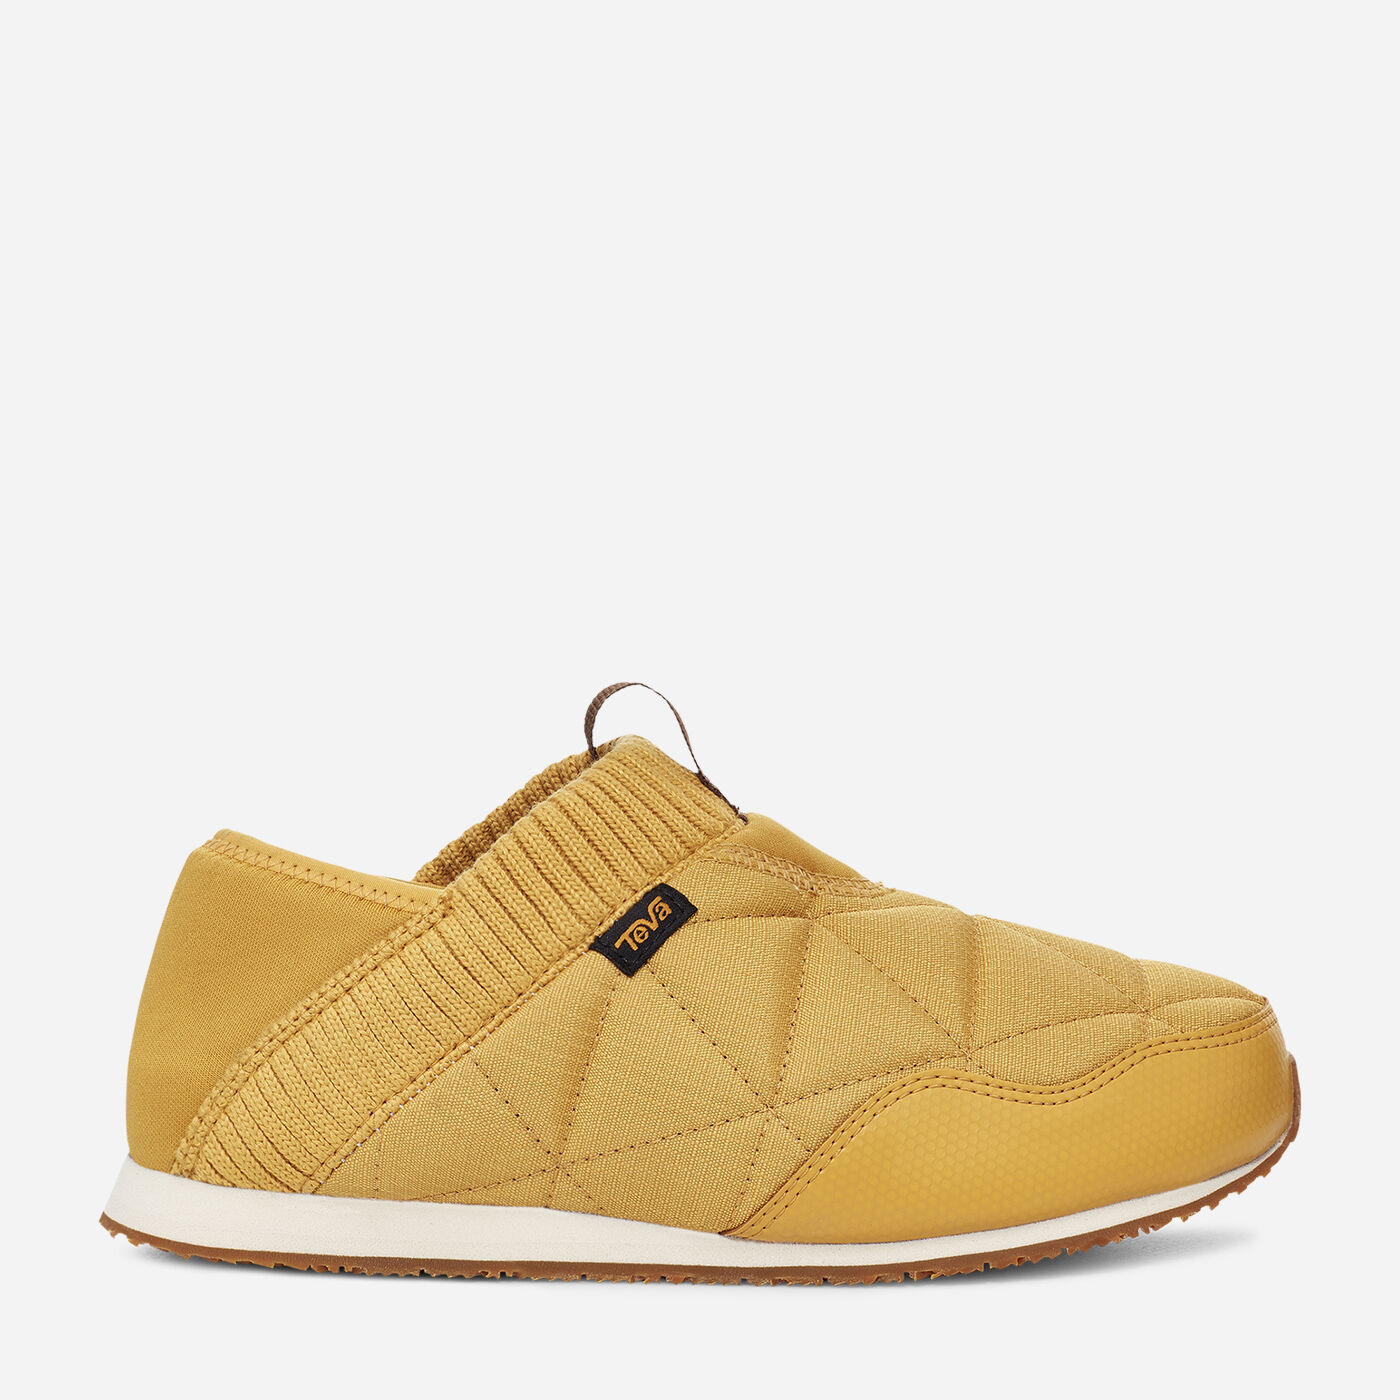 Women's TEVA ReEMBER Shoes in Honey Gold, Size 4 product